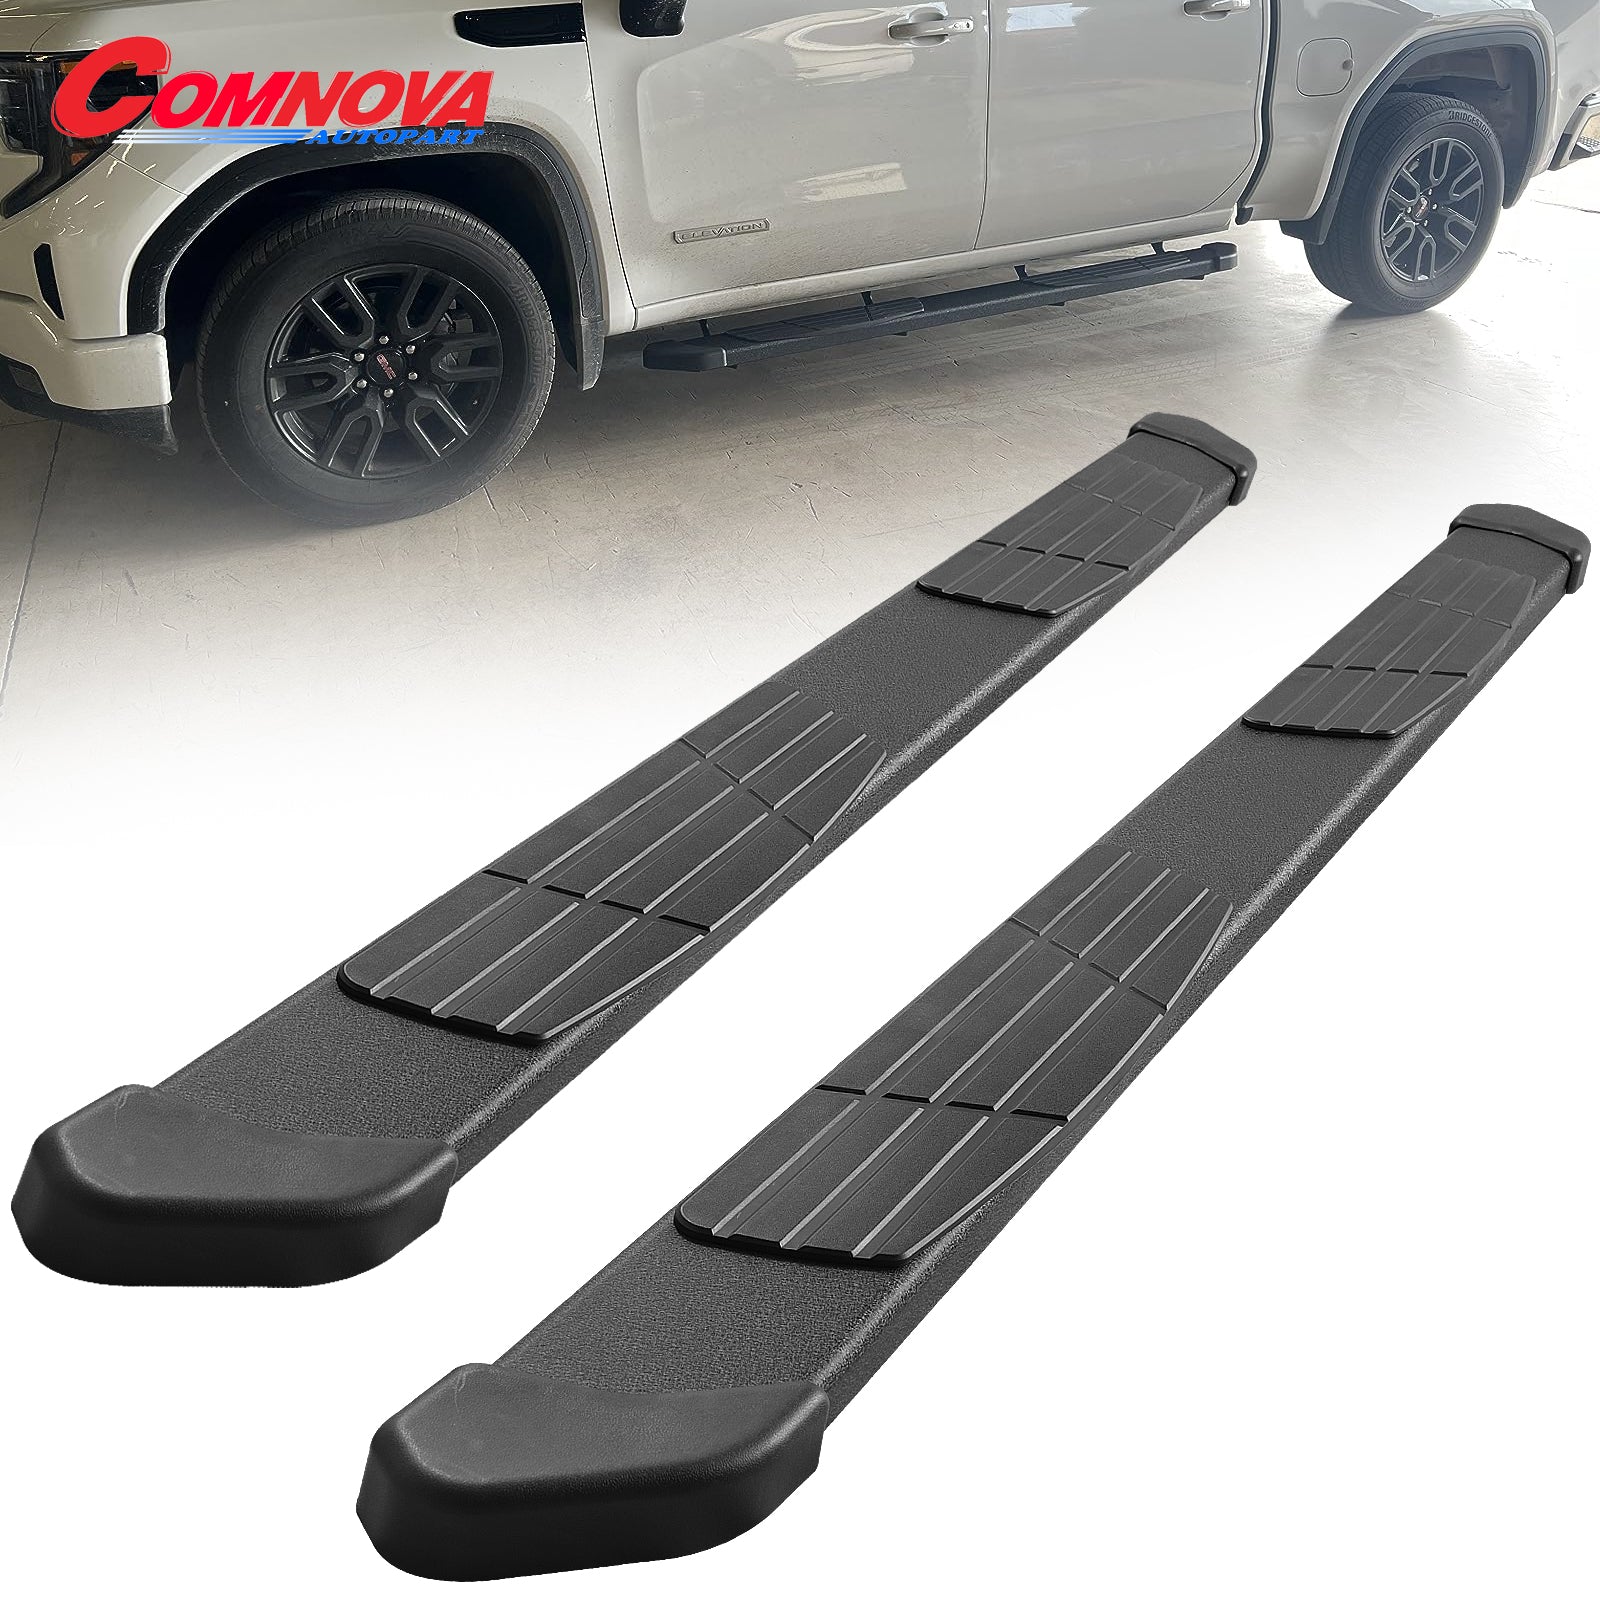 6.5” Running Boards Compatible with 2019-2024 Dodge Ram 1500 Quad Cab with 3/4 Size Rear Door, Black Side Steps T6 Style.